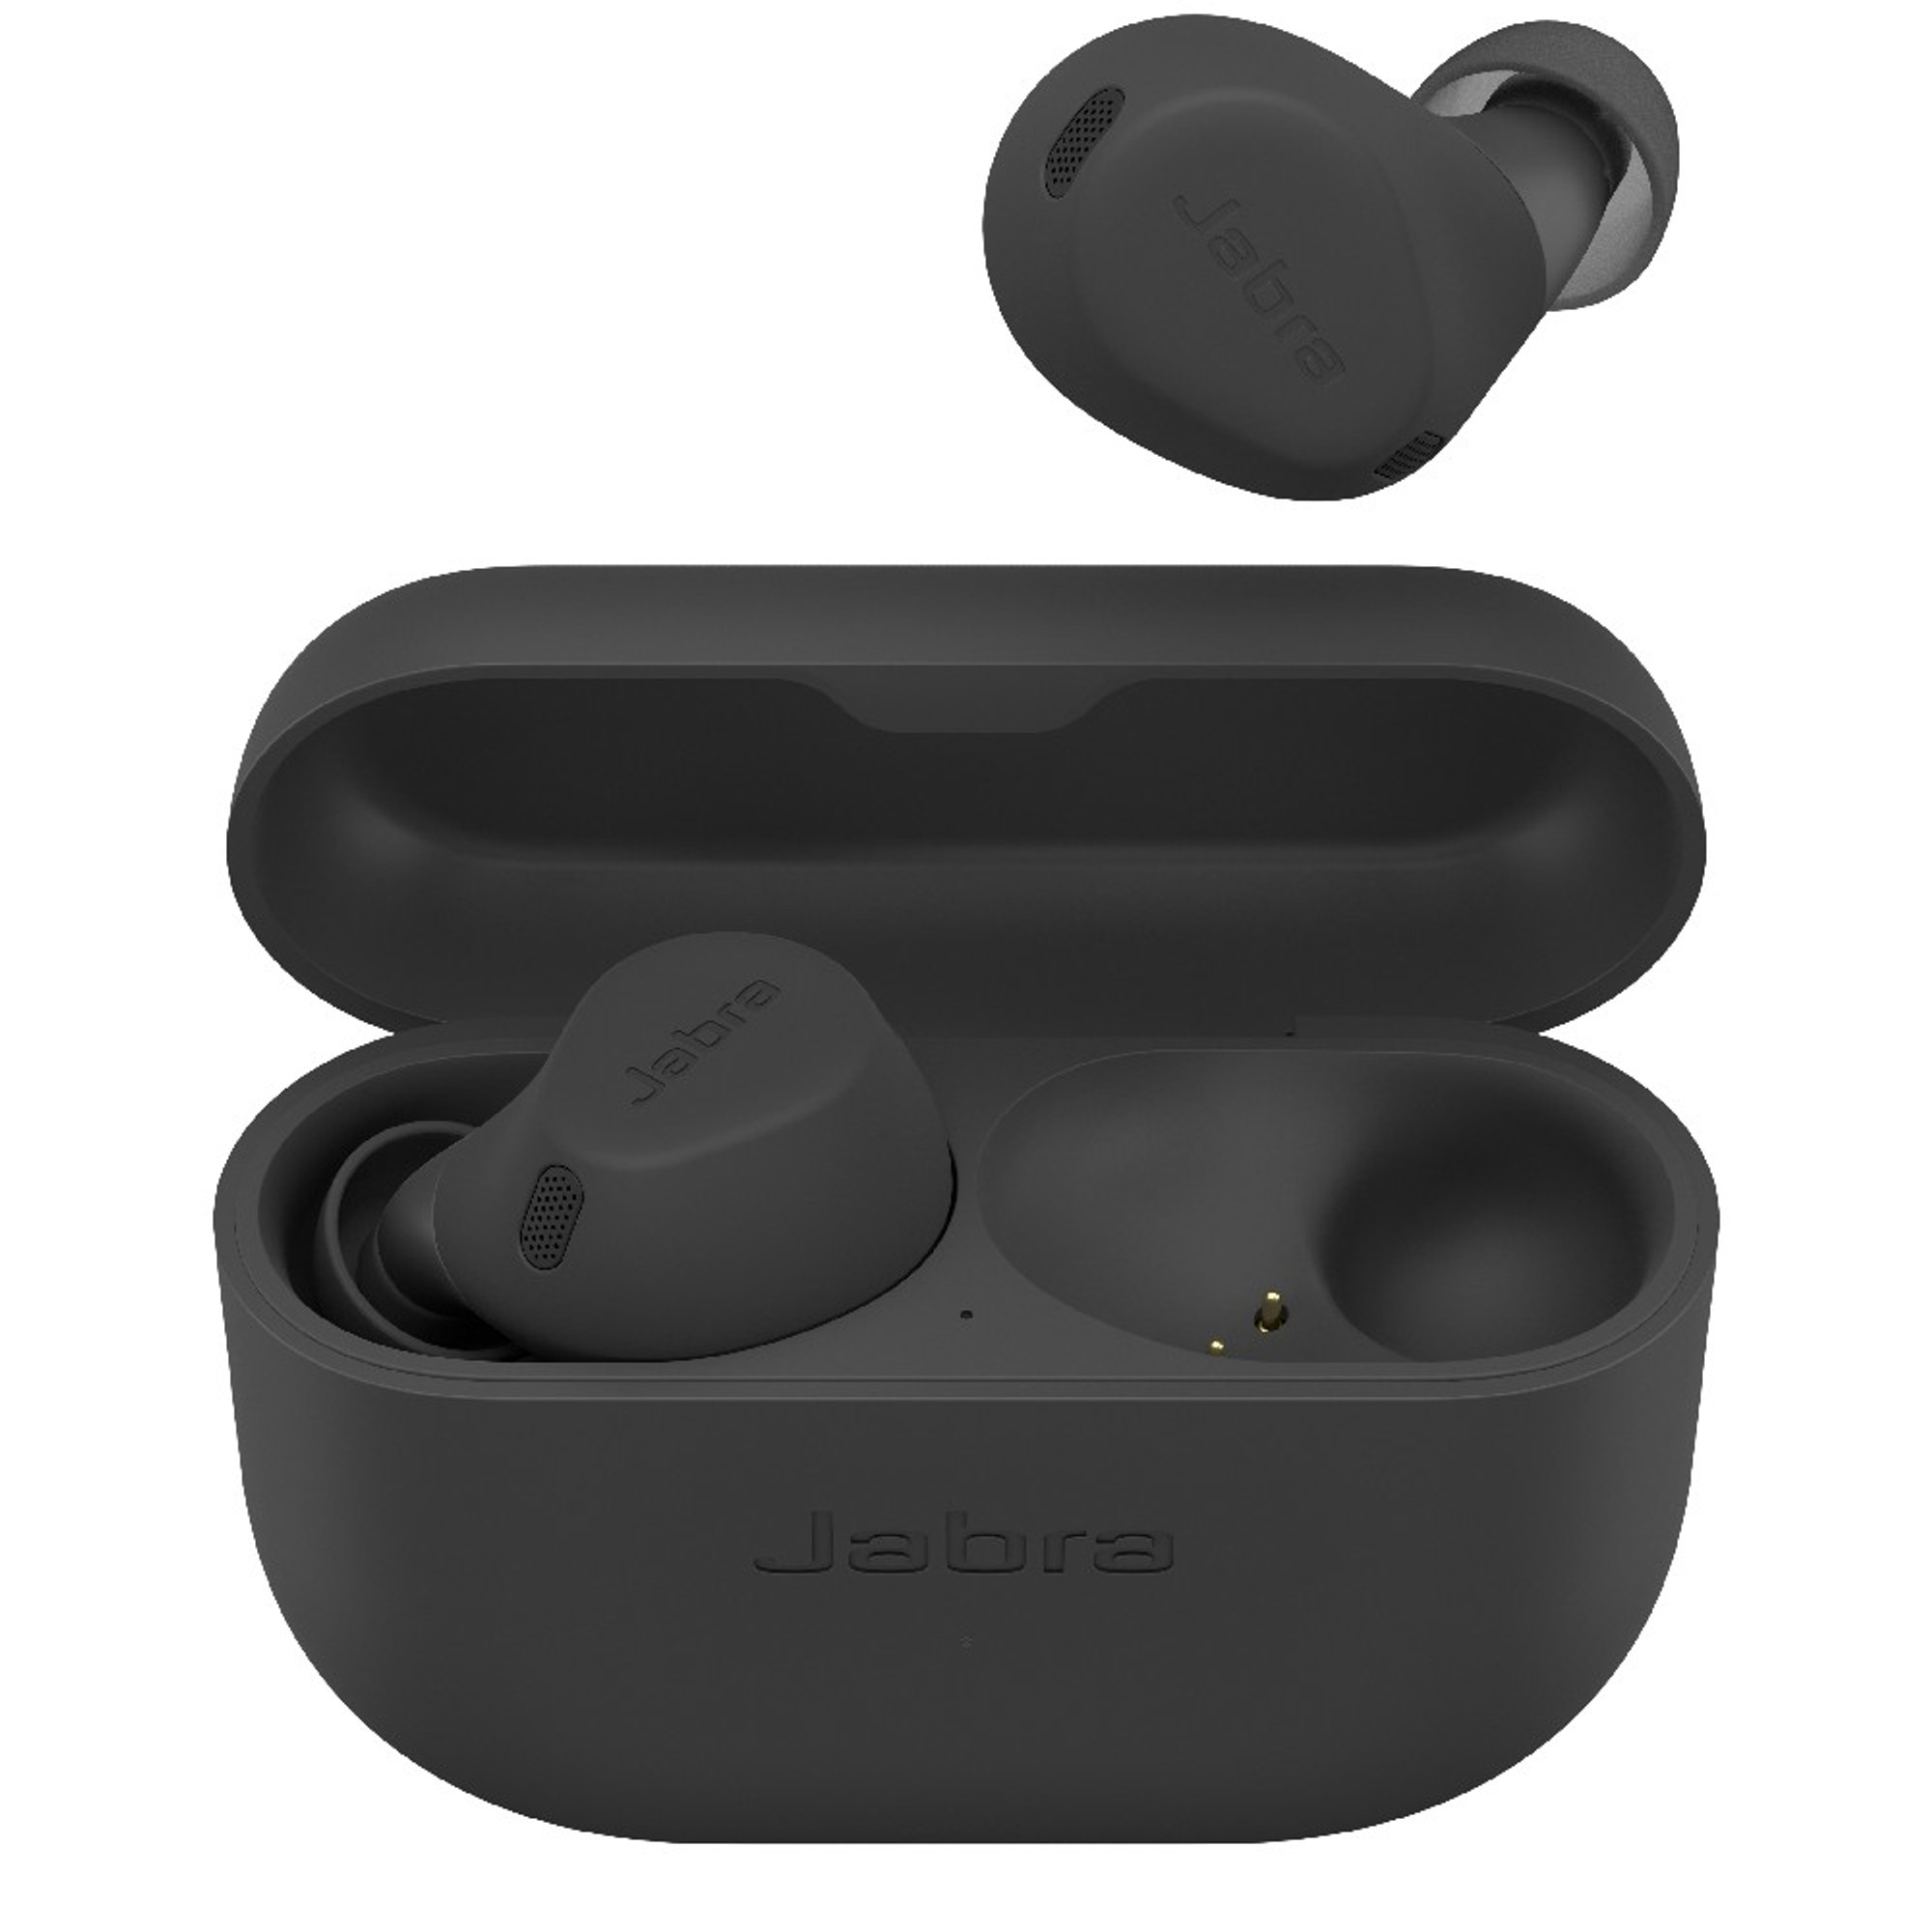 Jabra Elite 5 True Wireless Earbuds Bluetooth Earphones With Hybrid Active  Noise Cancellation ANC 6 Built-in Microphones